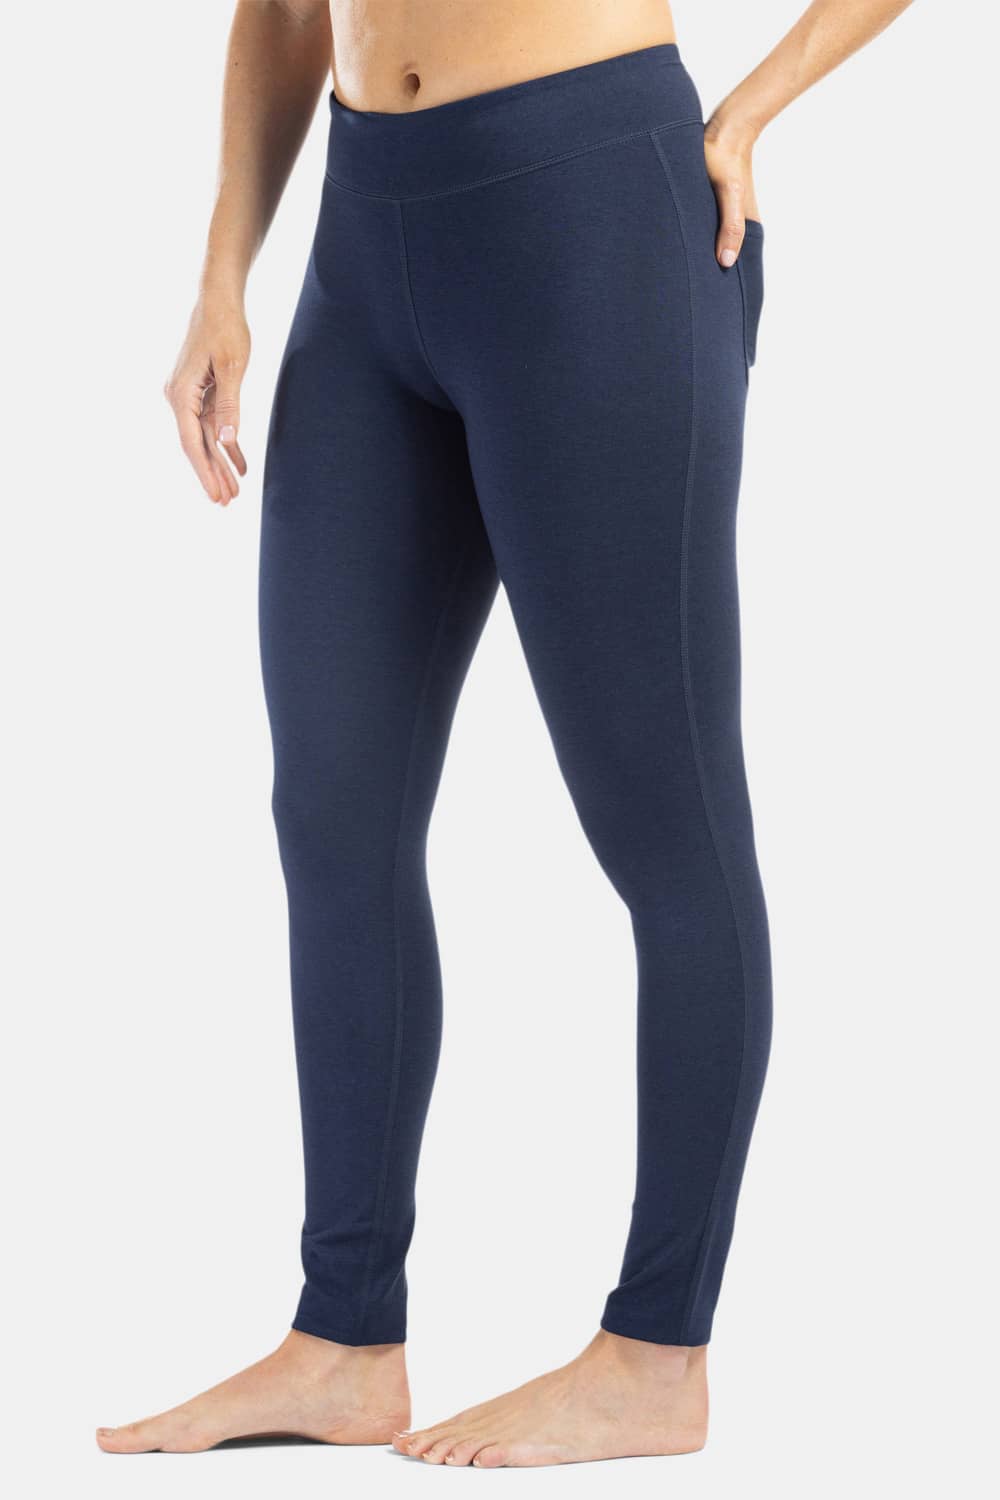 Women’s EcoFabric™ Ankle Length Legging With Back Pockets Womens>Activewear>Yoga Pants Fishers Finery Navy X-Small Regular